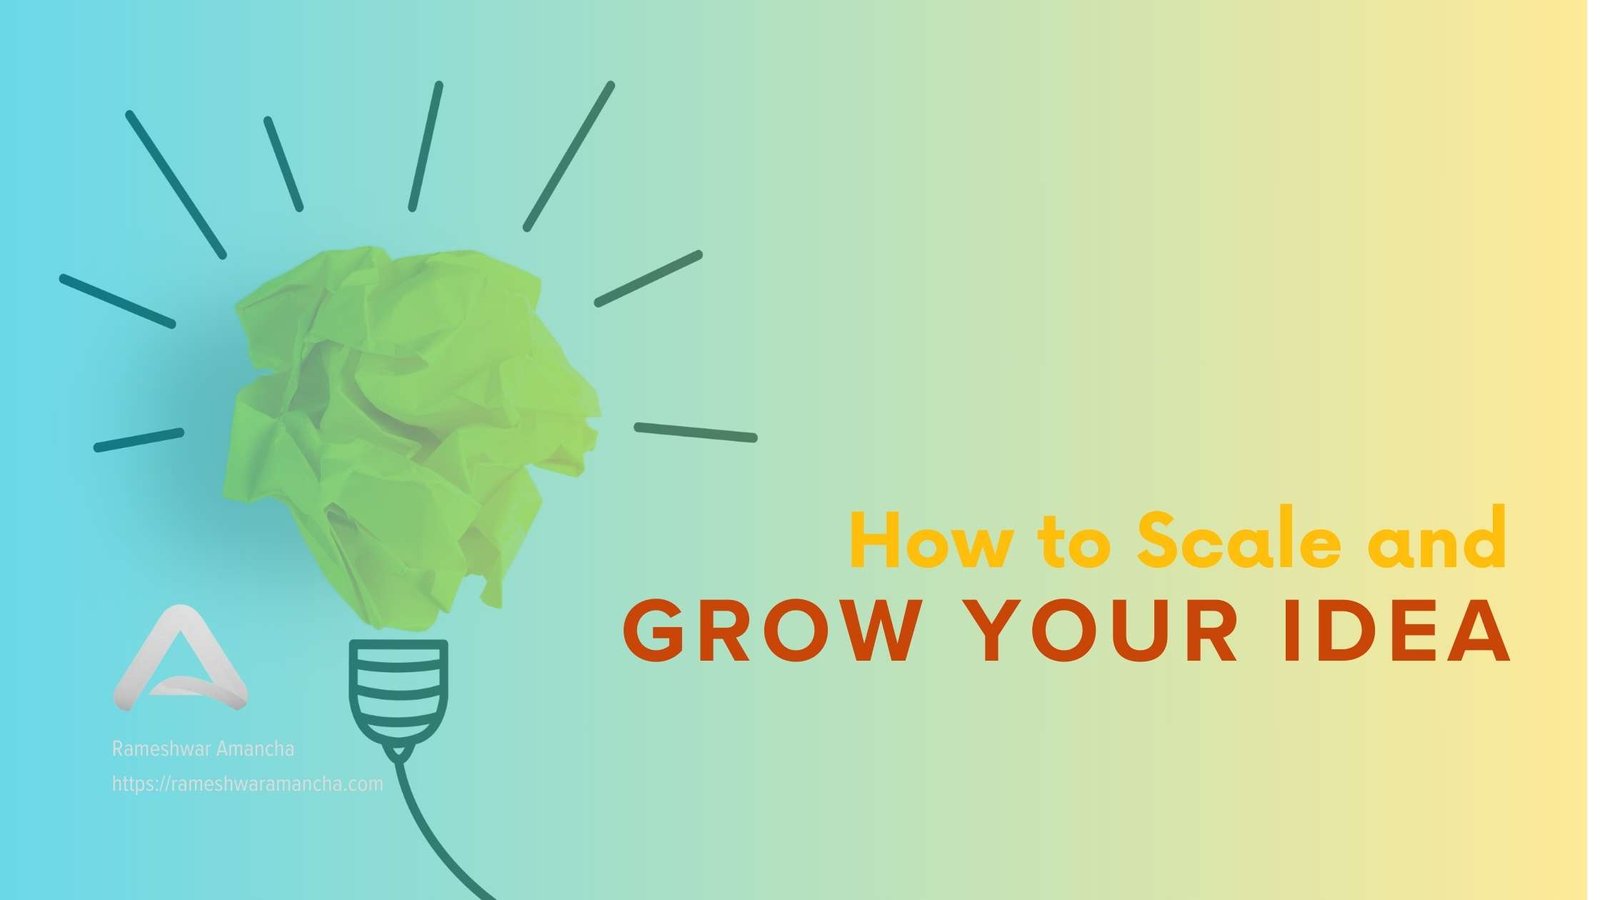 How to Scale and GROW your Idea